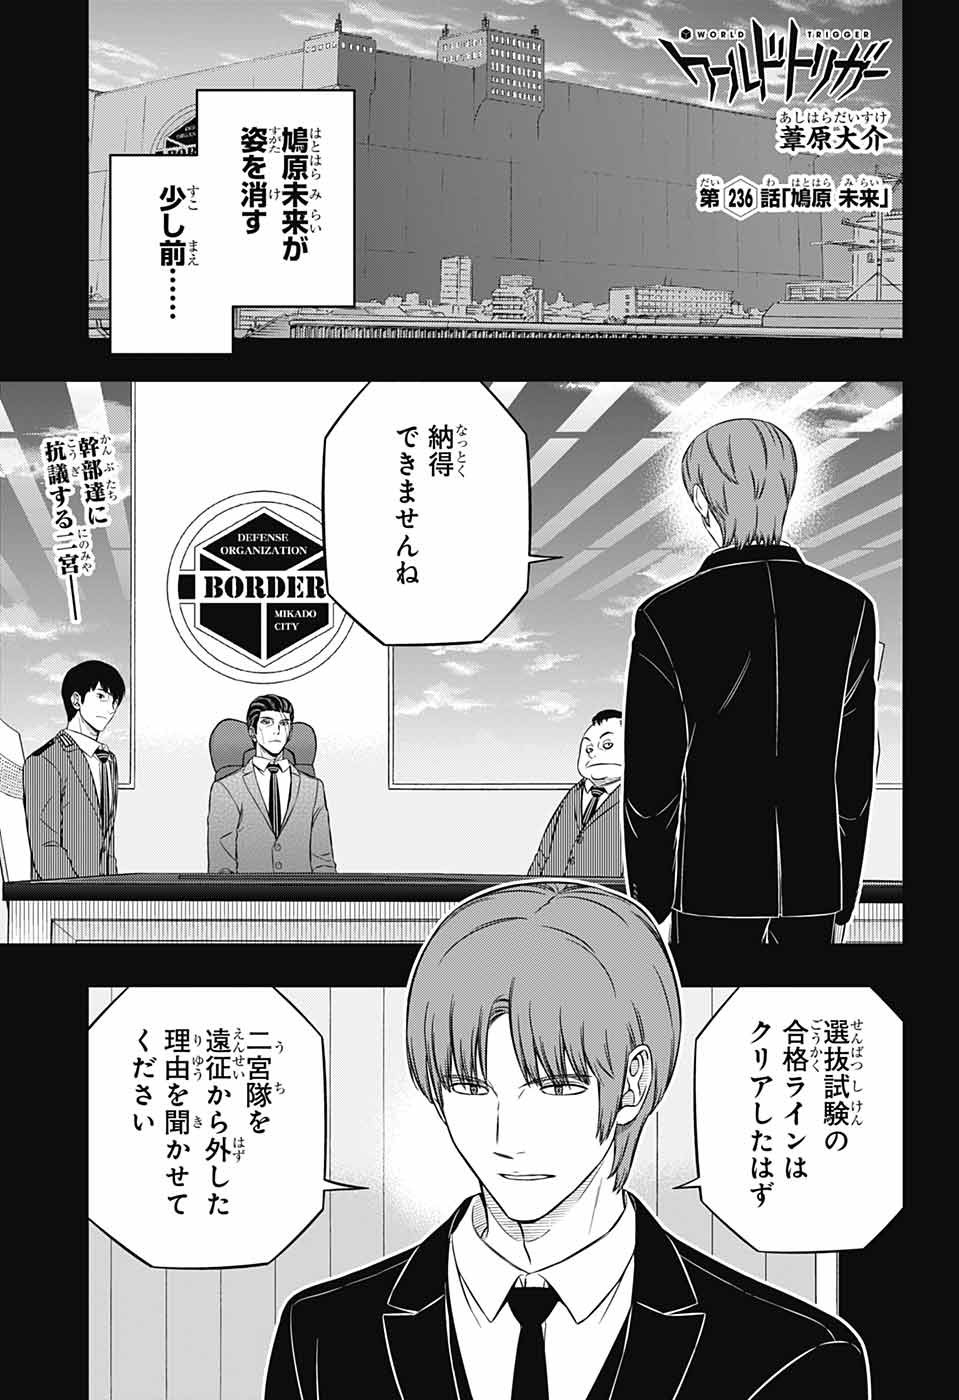 World Trigger - Chapter 236 - Page 1